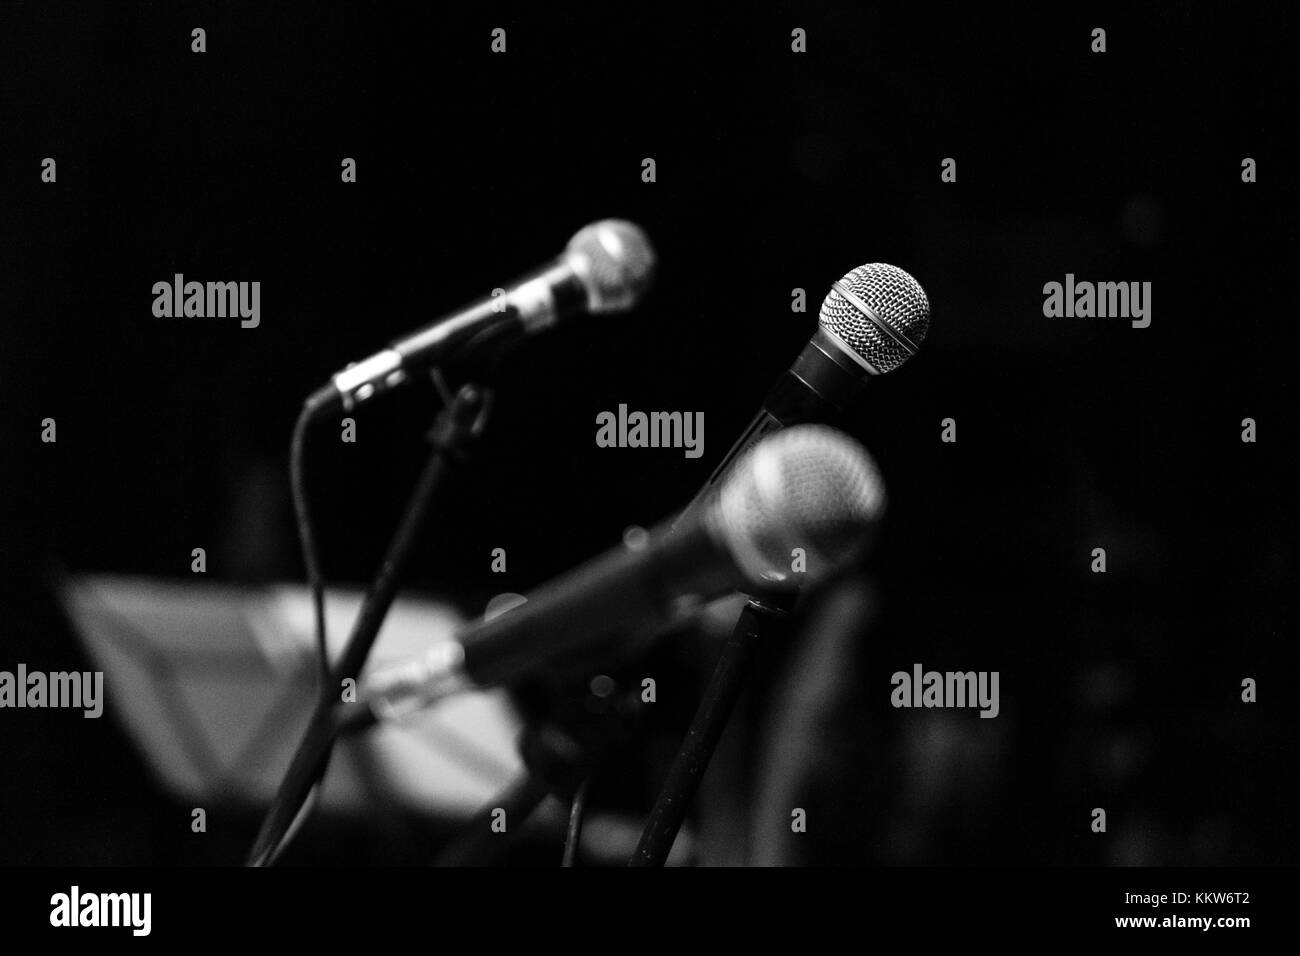 Three microphones used during a musical concert. Stock Photo